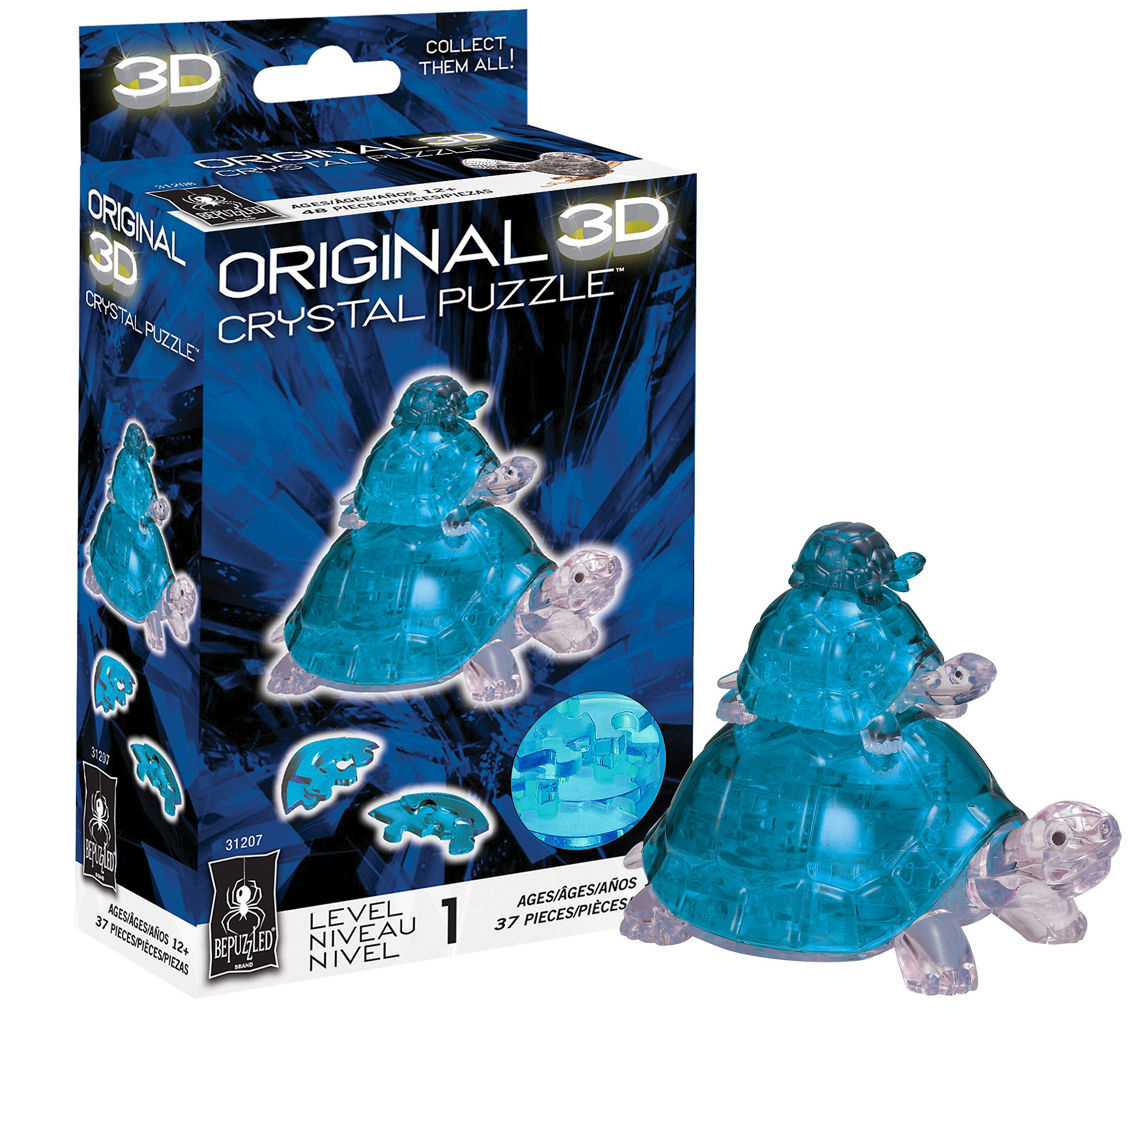 BePuzzled 3D Crystal Puzzle - Turtles (Blue): 37 Pcs - Image 2 of 5